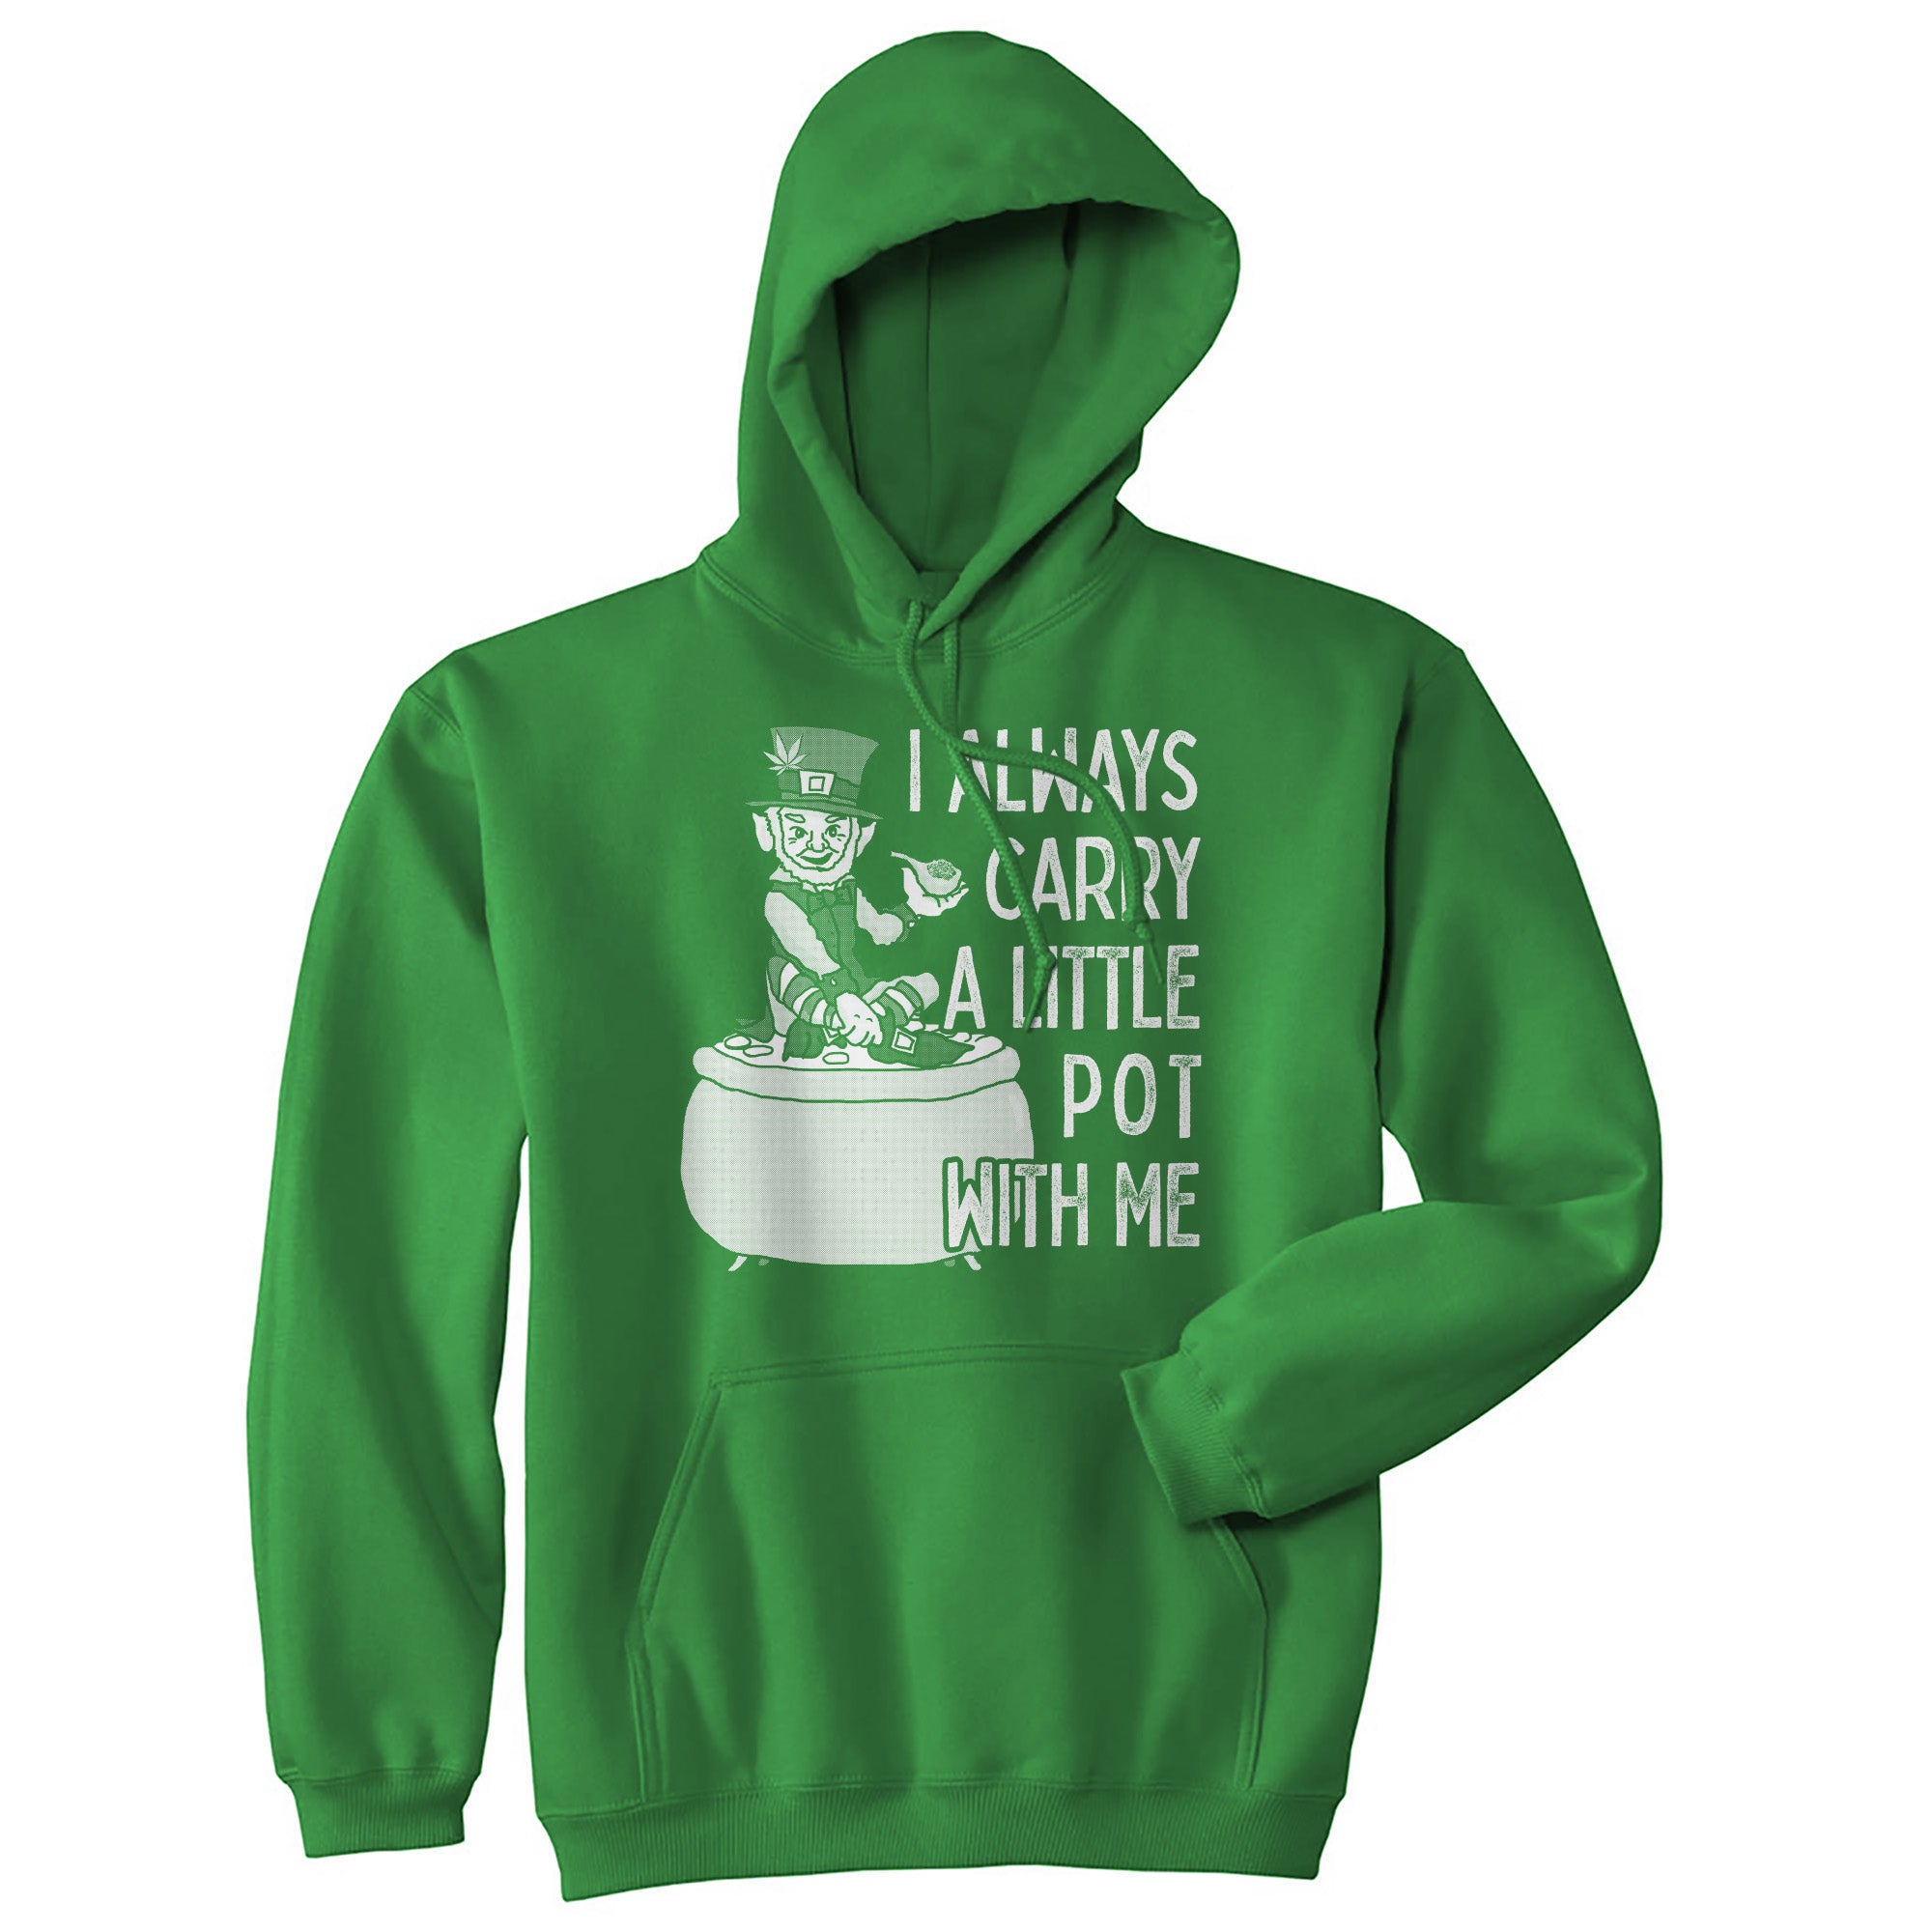 Funny Green I Always Carry A Little Pot With Me Hoodie Nerdy Saint Patrick's Day 420 Tee